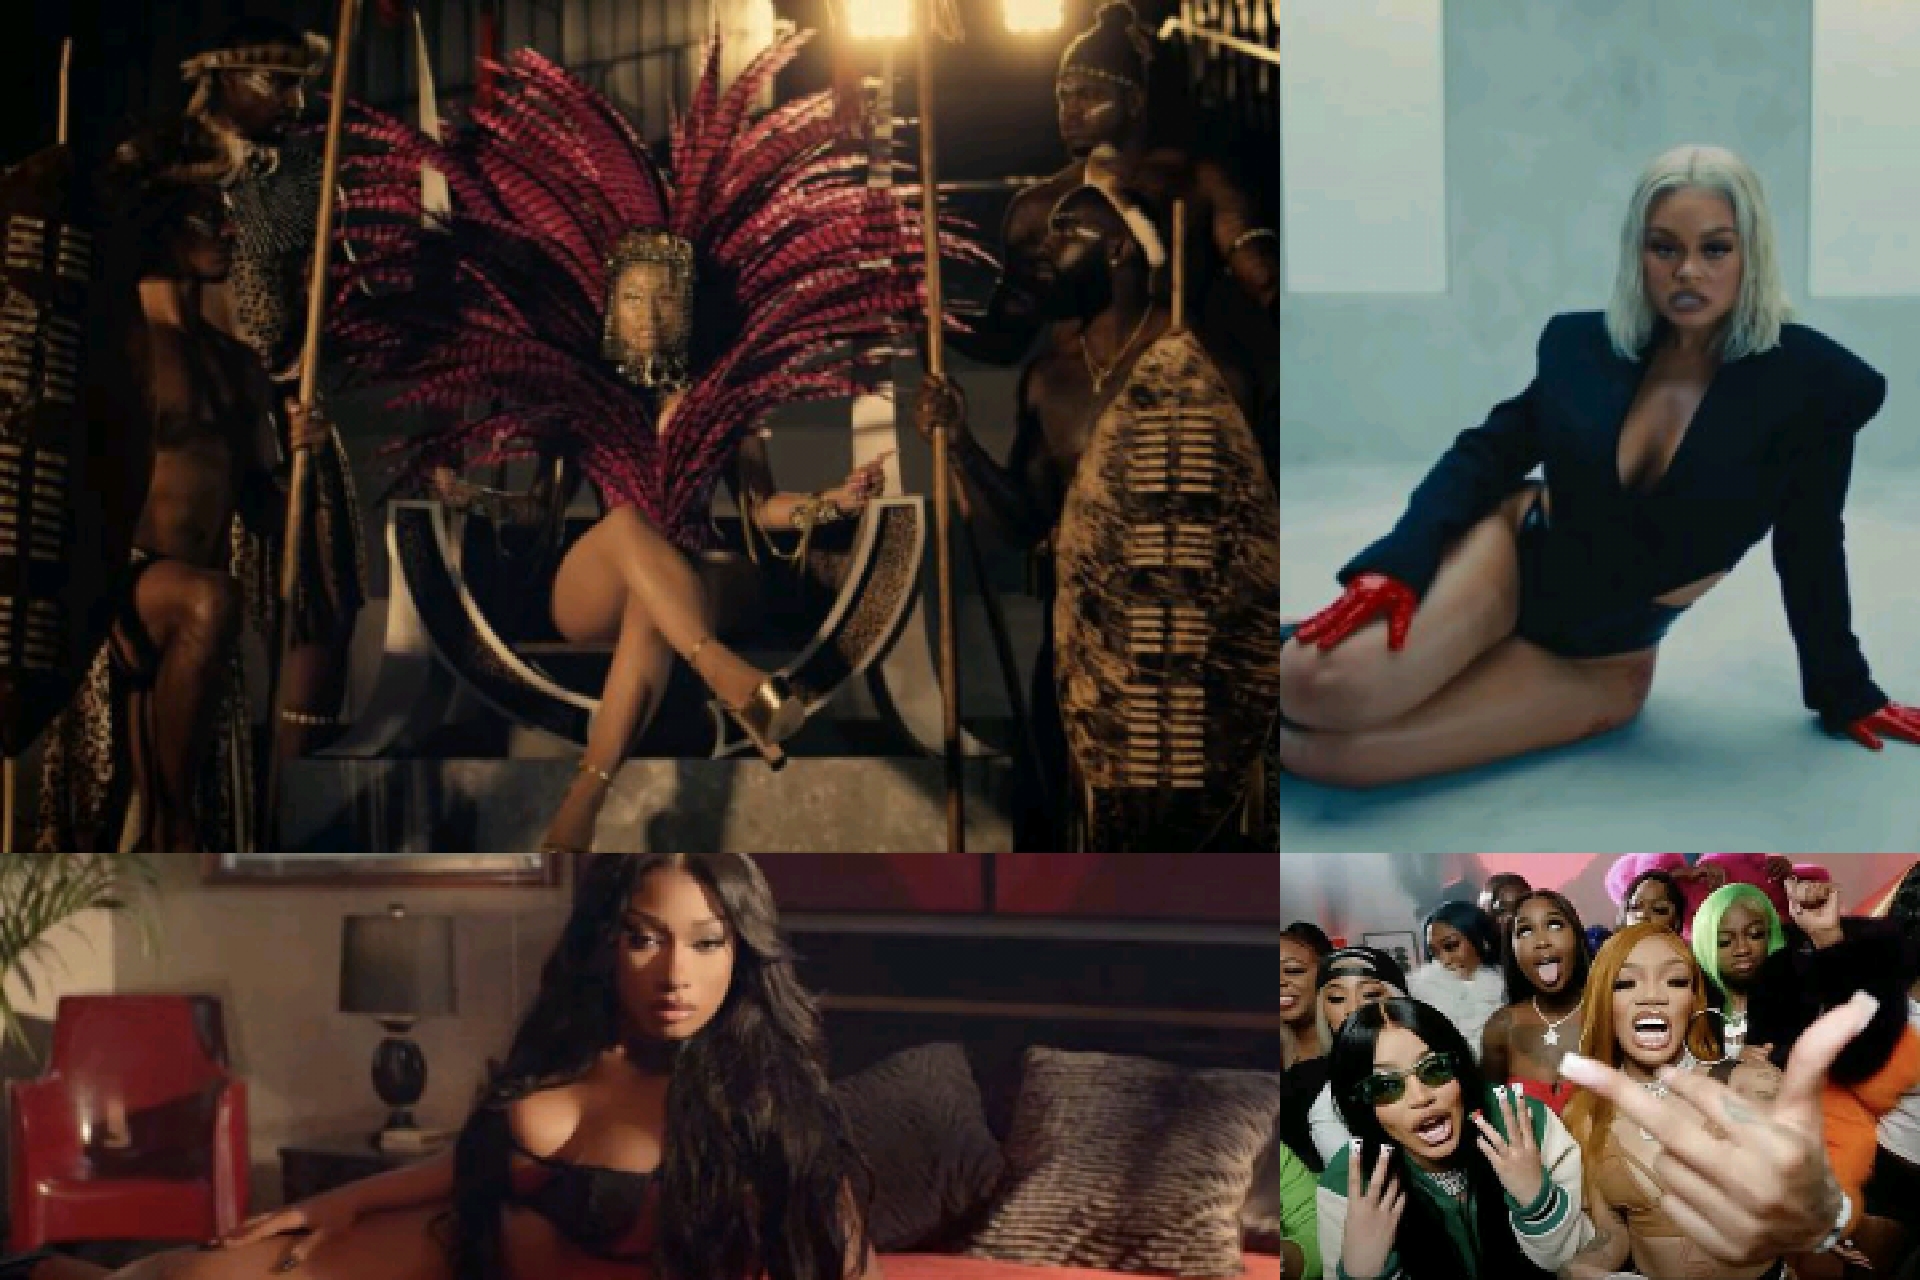 Best Female Music Videos This Month